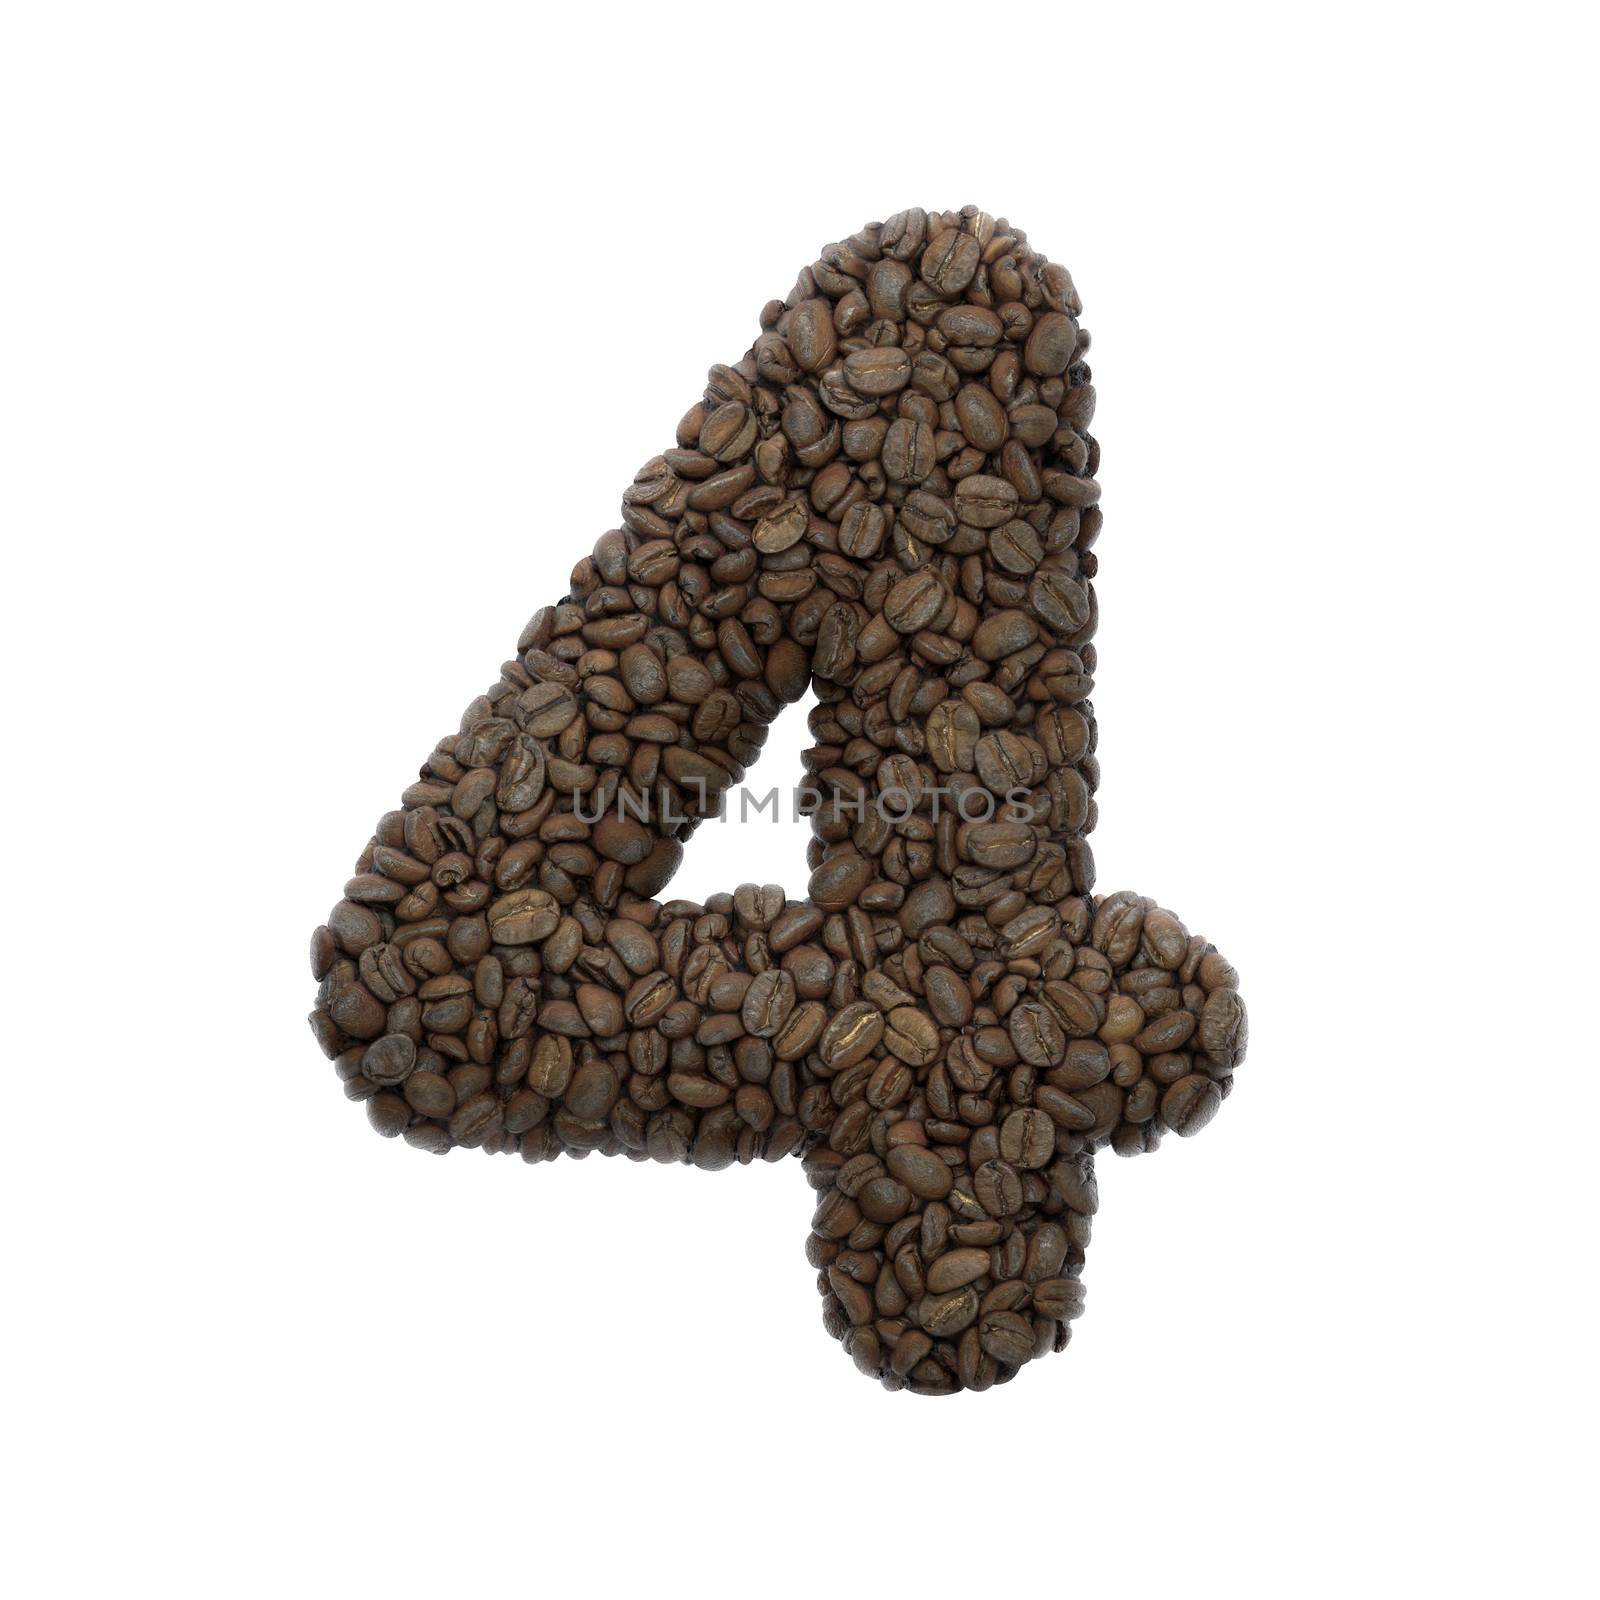 Coffee number 4 -  3d roasted beans digit - Suitable for Coffee, energy or insomnia related subjects by chrisroll